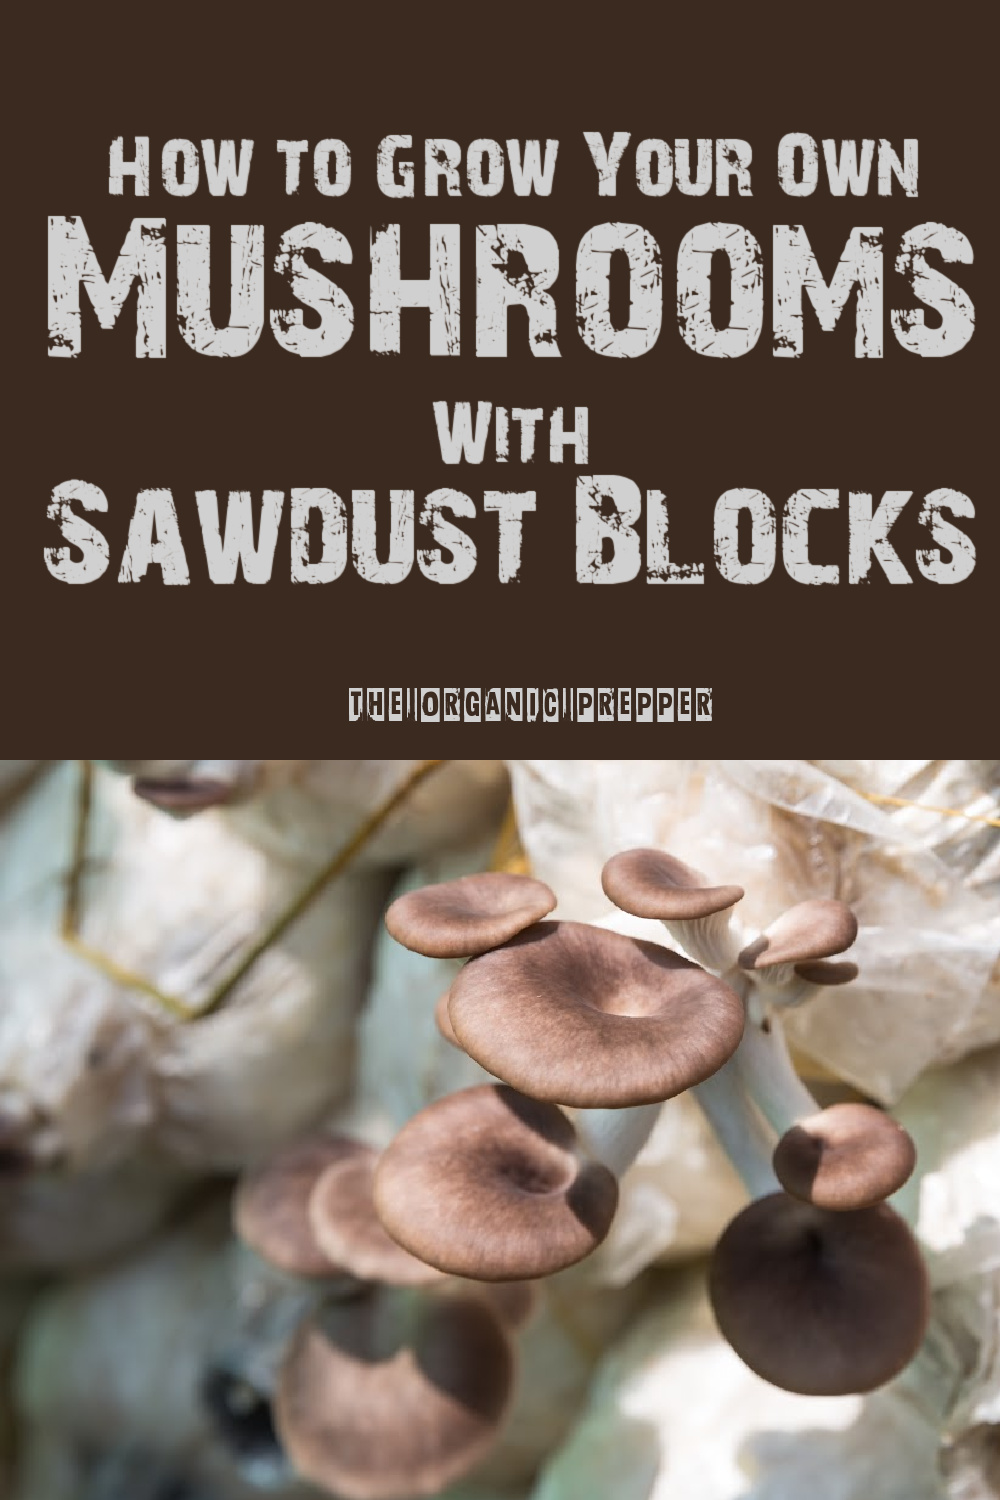 How to Grow Your Own Mushrooms With Sawdust Blocks